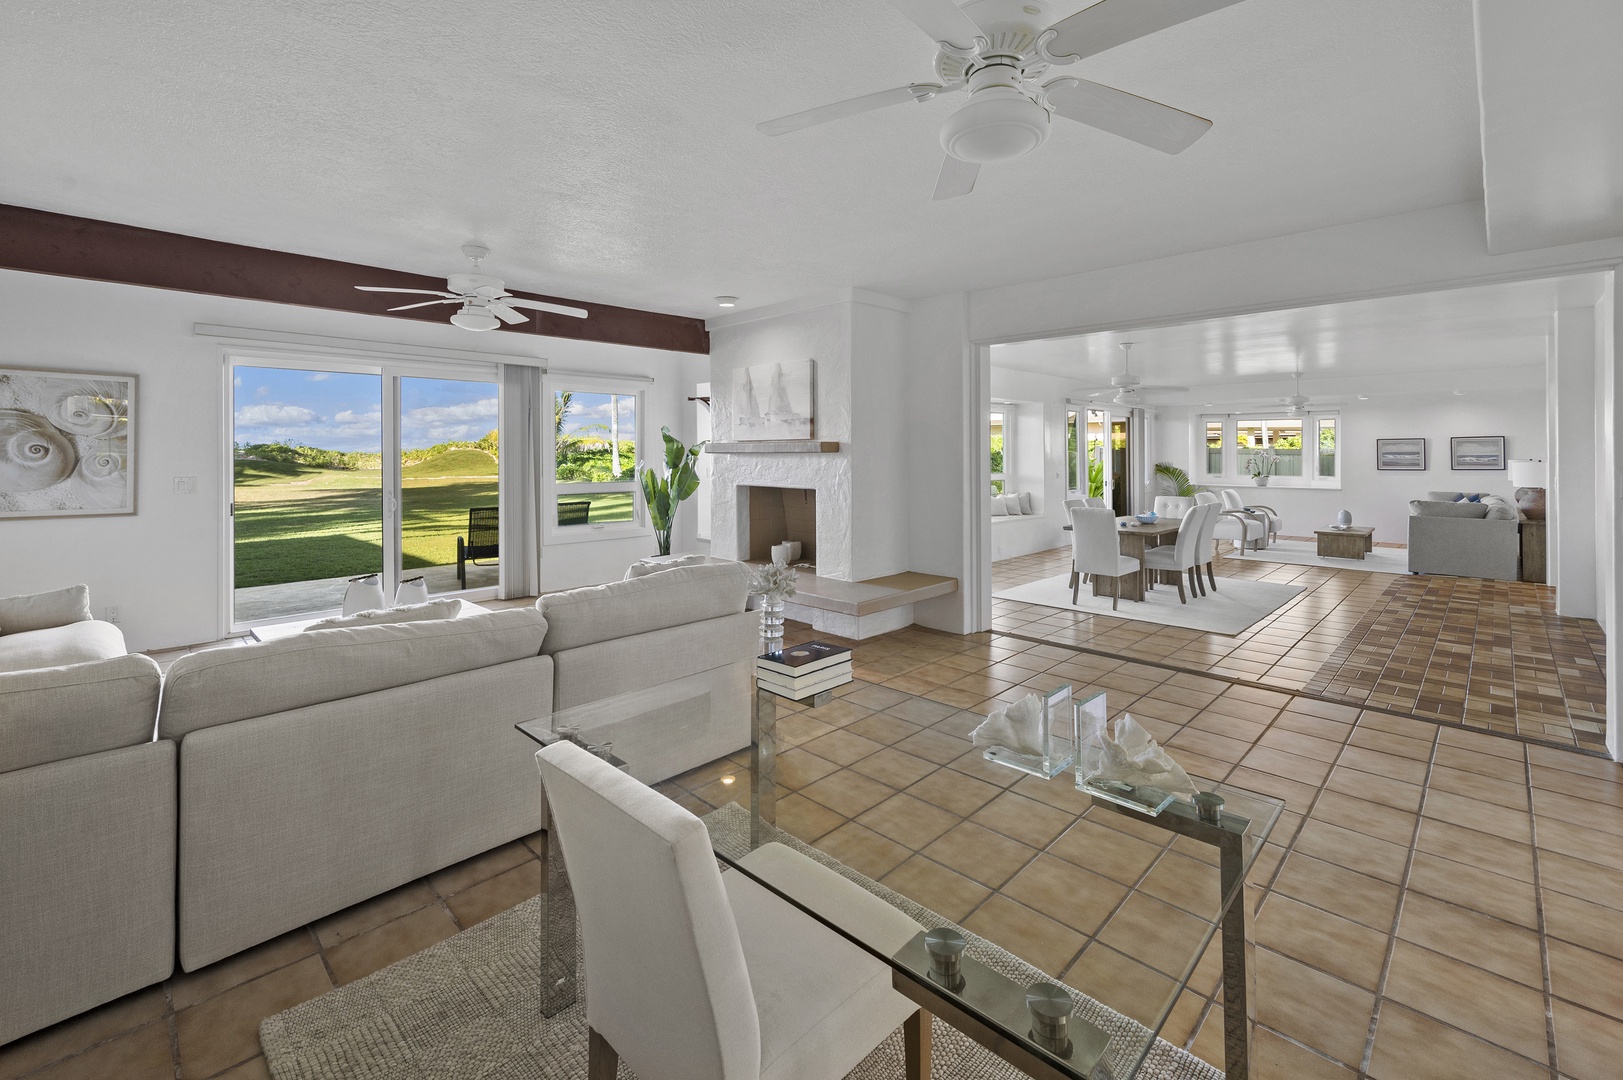 Kailua Vacation Rentals, Kailua Hale Kahakai - This open-concept floor plan is aptly fit for entertaining, complete with living room, dining area, and library